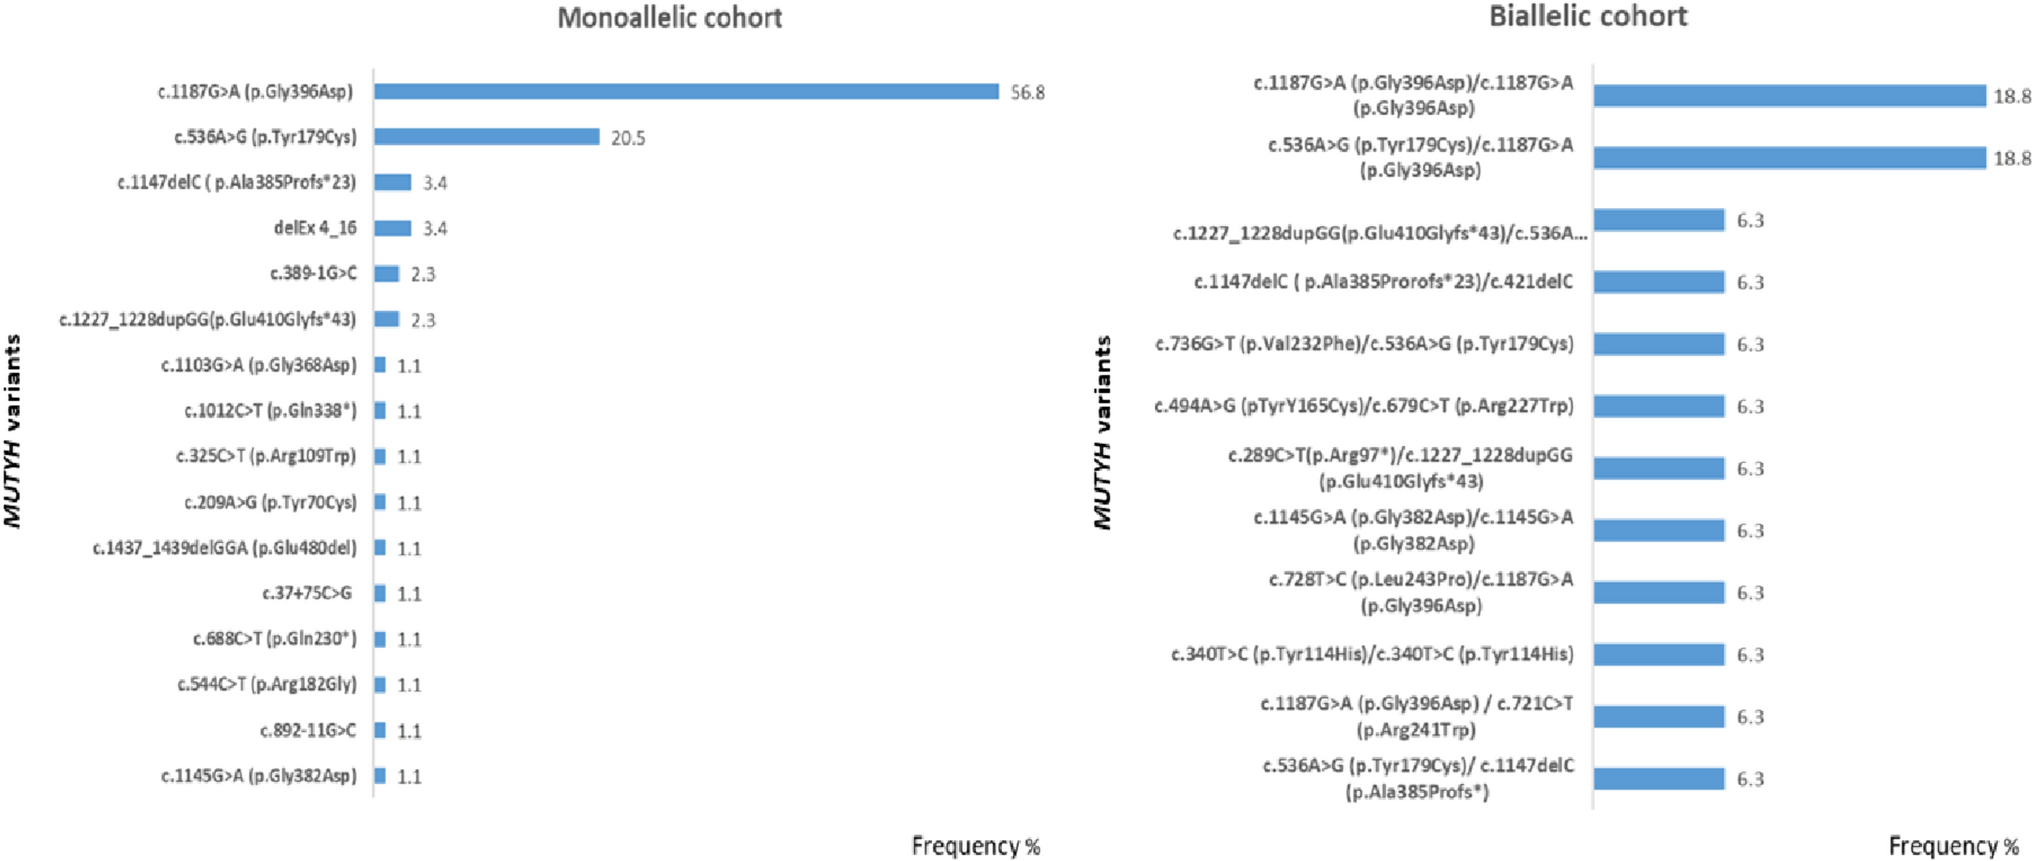 A comprehensive characterization of the spectrum of MUTYH germline pathogenic variants in Latin America